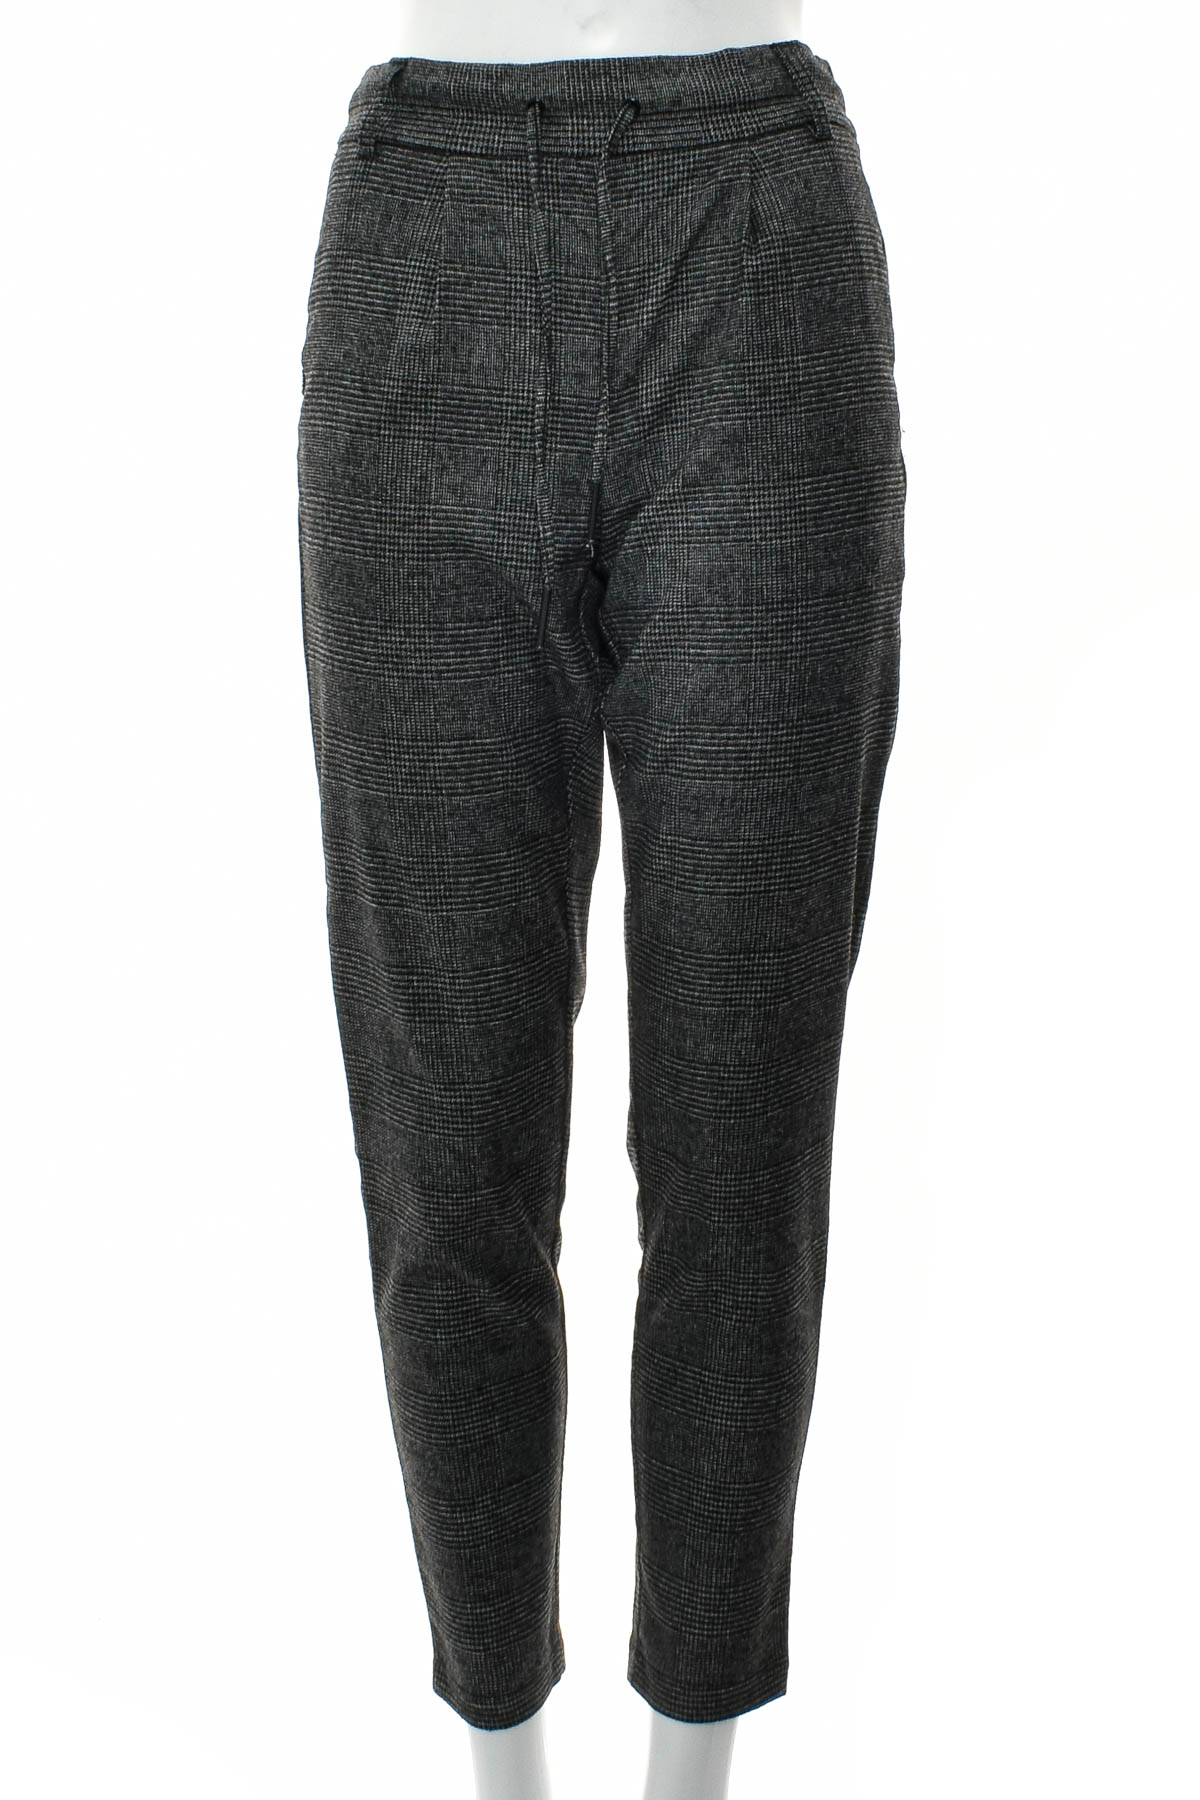 Women's trousers - ONLY - 0